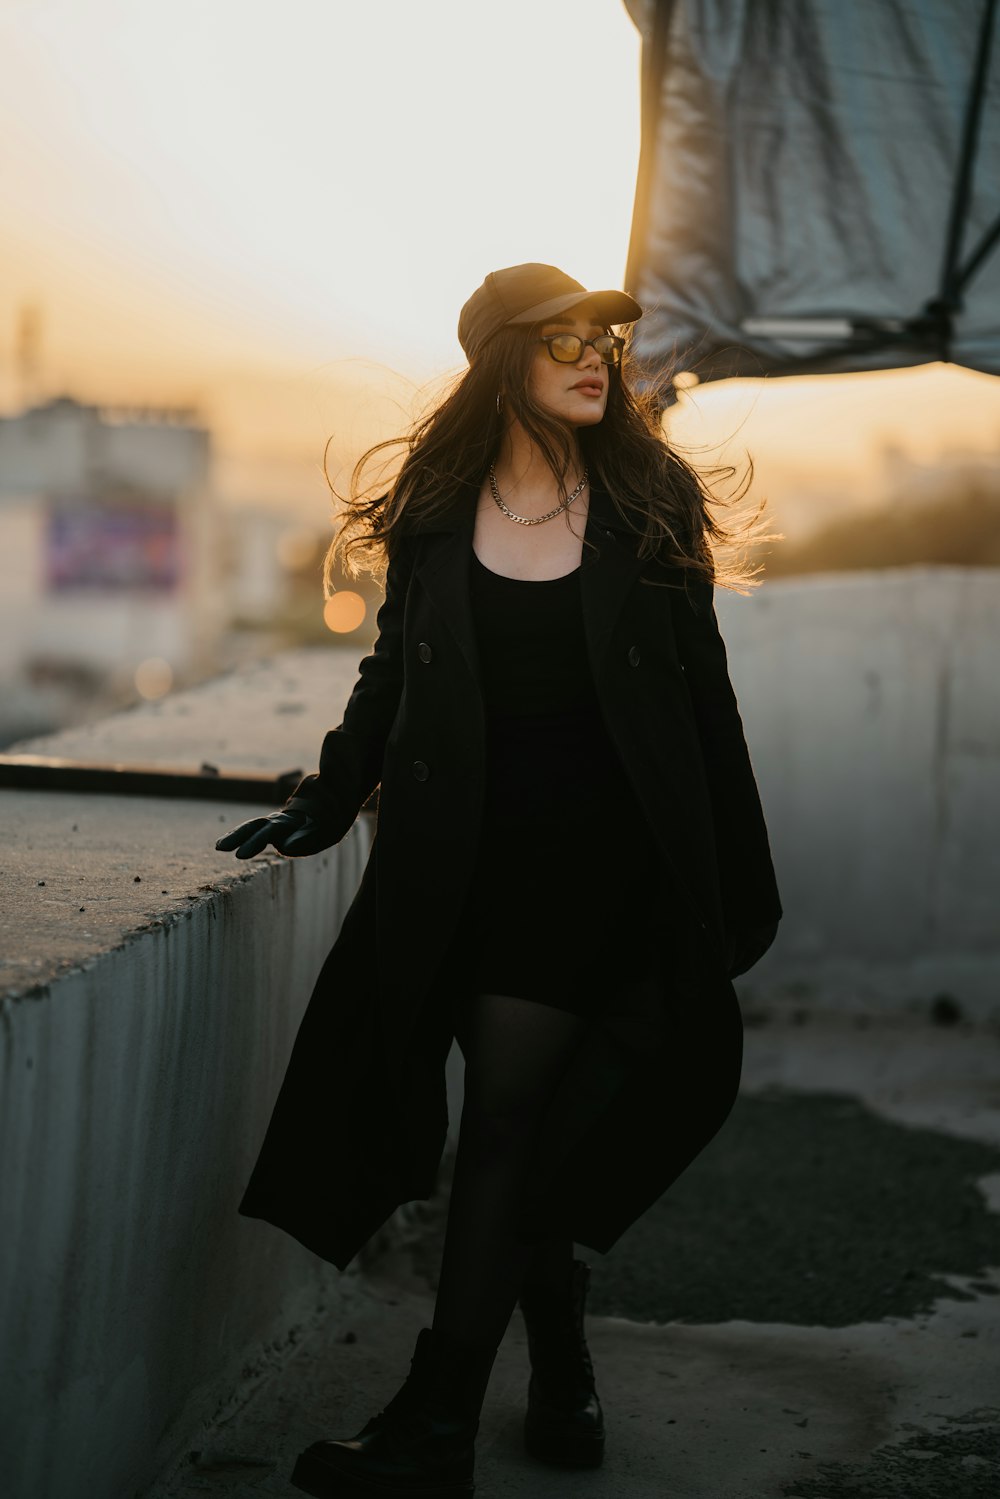 woman in black long sleeve dress and yellow sun hat standing on gray concrete pavement during